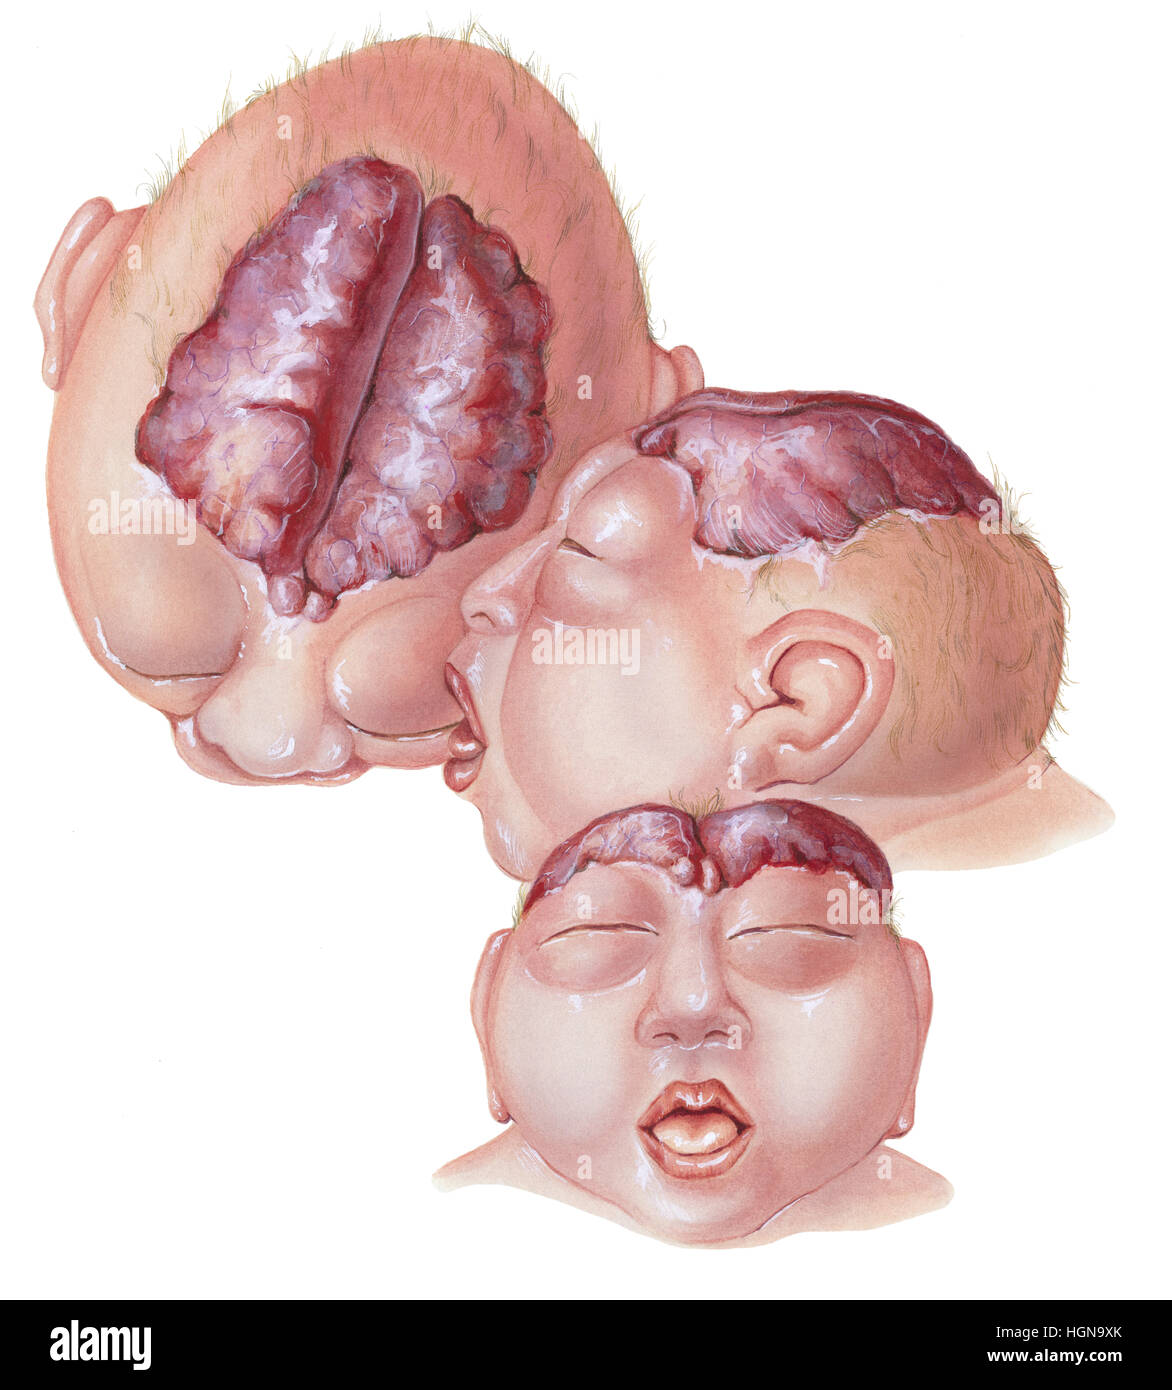 A newborn baby with anencephaly showing the brain protruding through the skull from three views Stock Photo